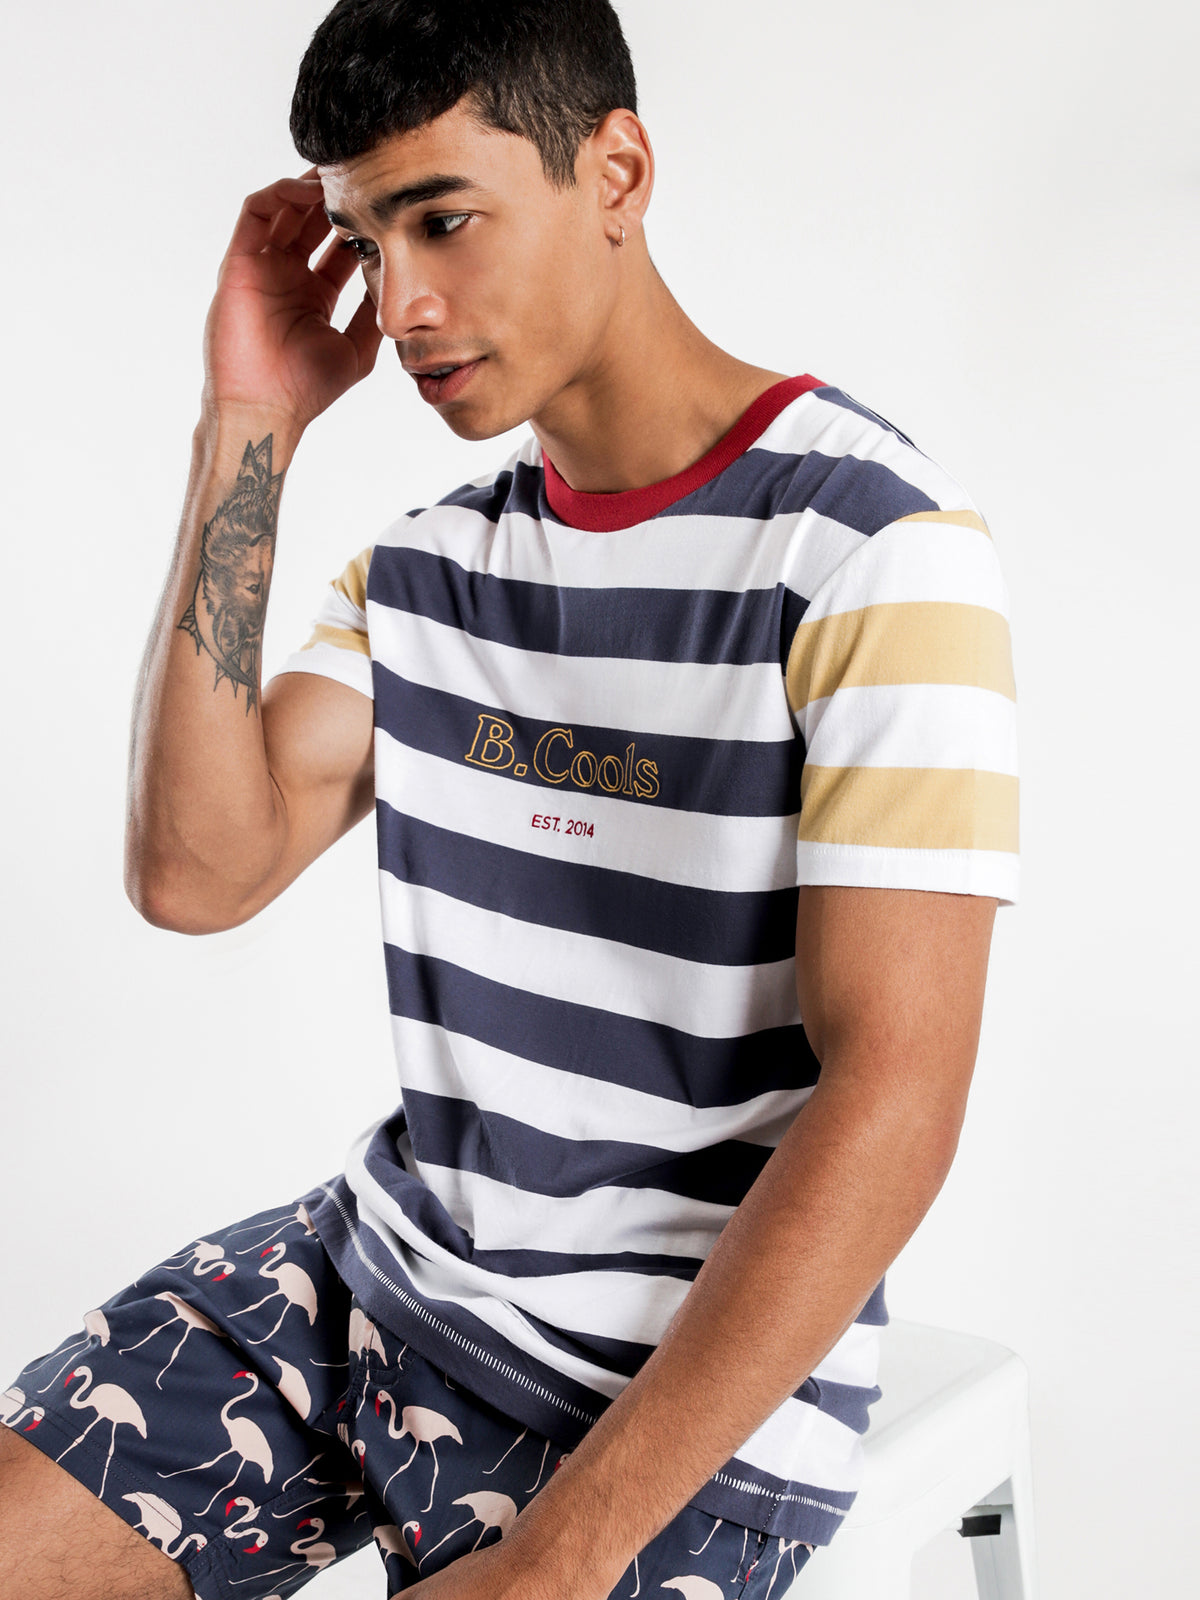 B Cools Heritage T-Shirt in Navy Stripe